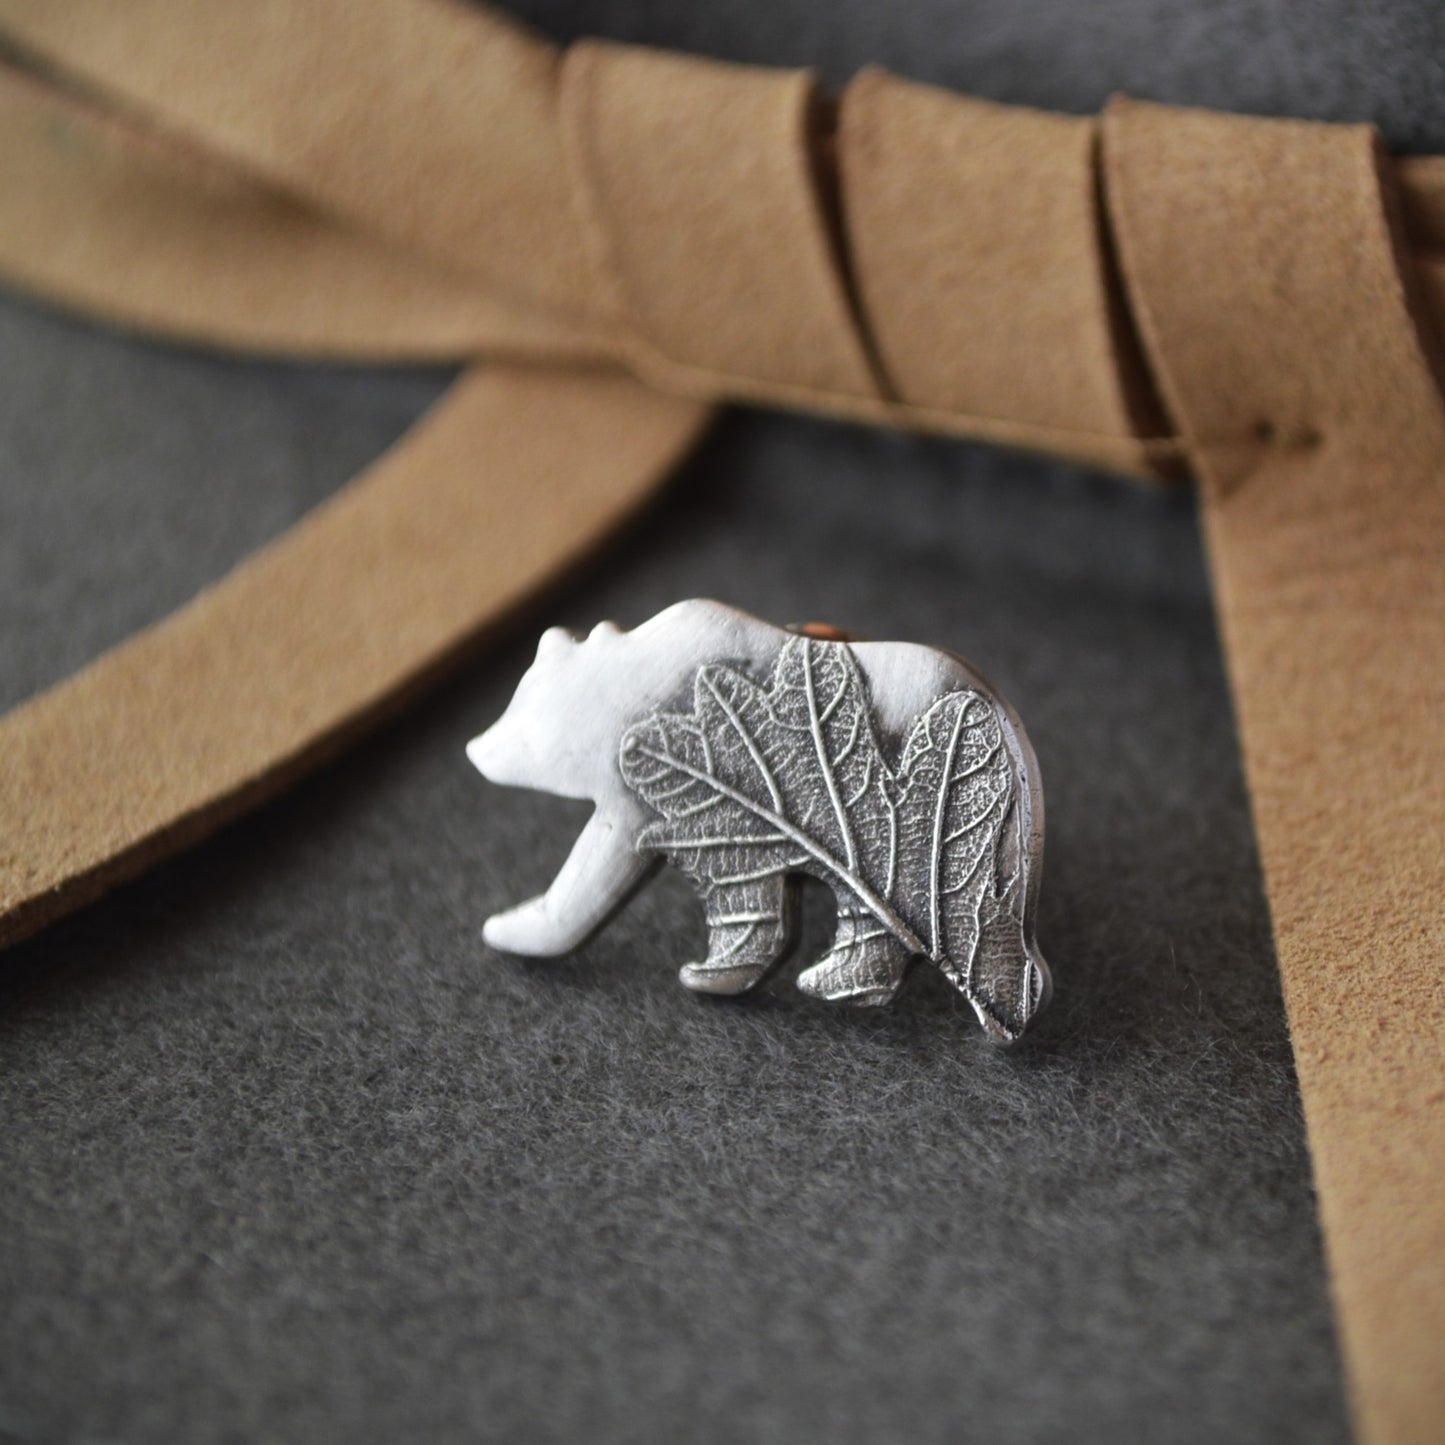 Bear Tie Tack or Hat Pin, Textured with Oak Leaf